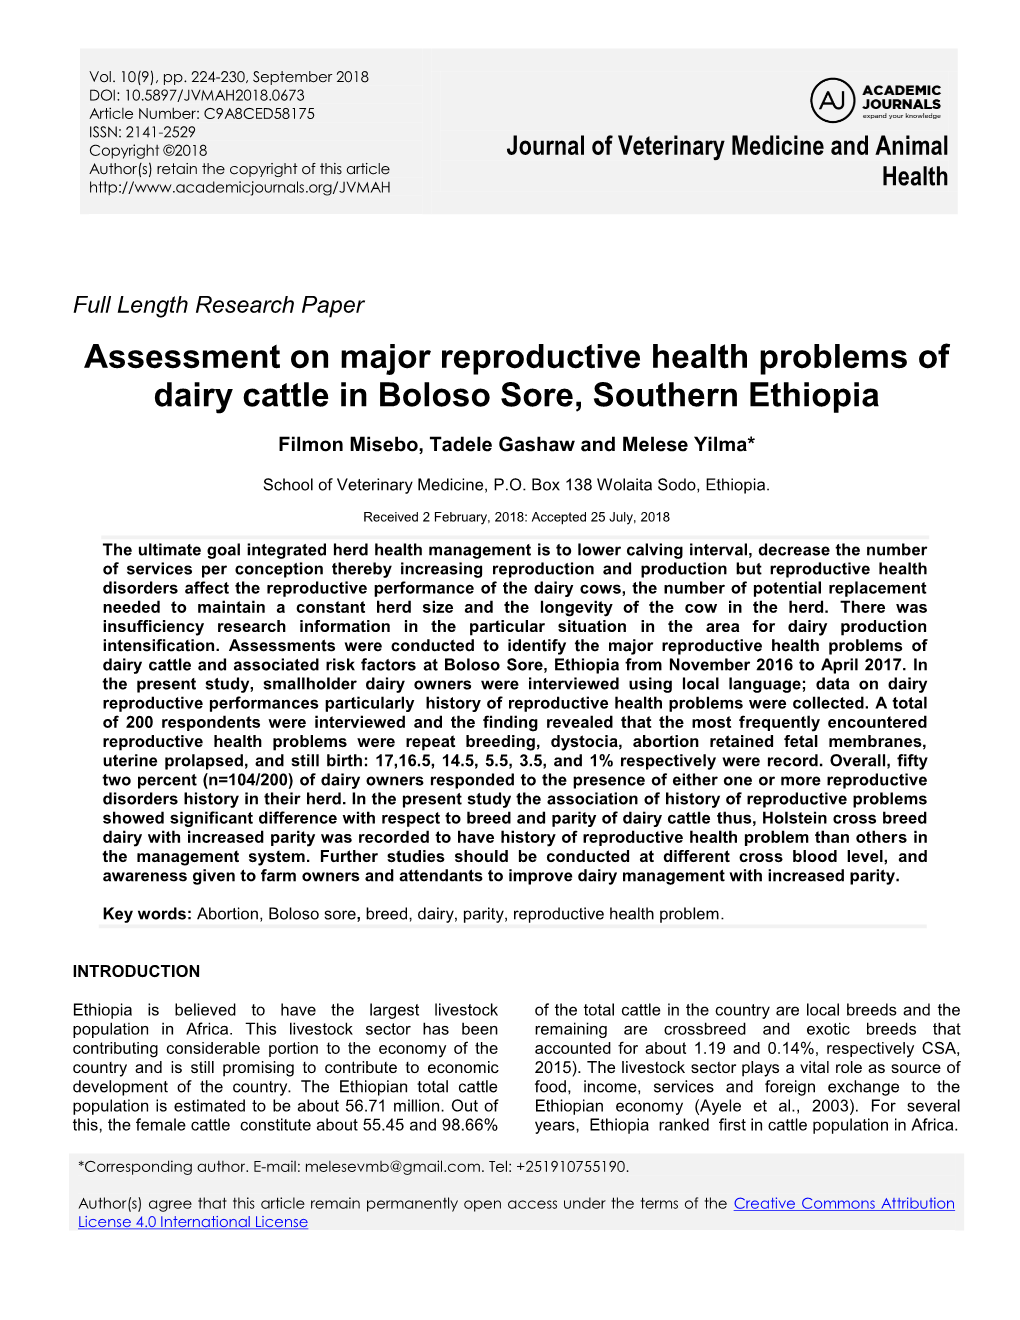 Assessment on Major Reproductive Health Problems of Dairy Cattle in Boloso Sore, Southern Ethiopia